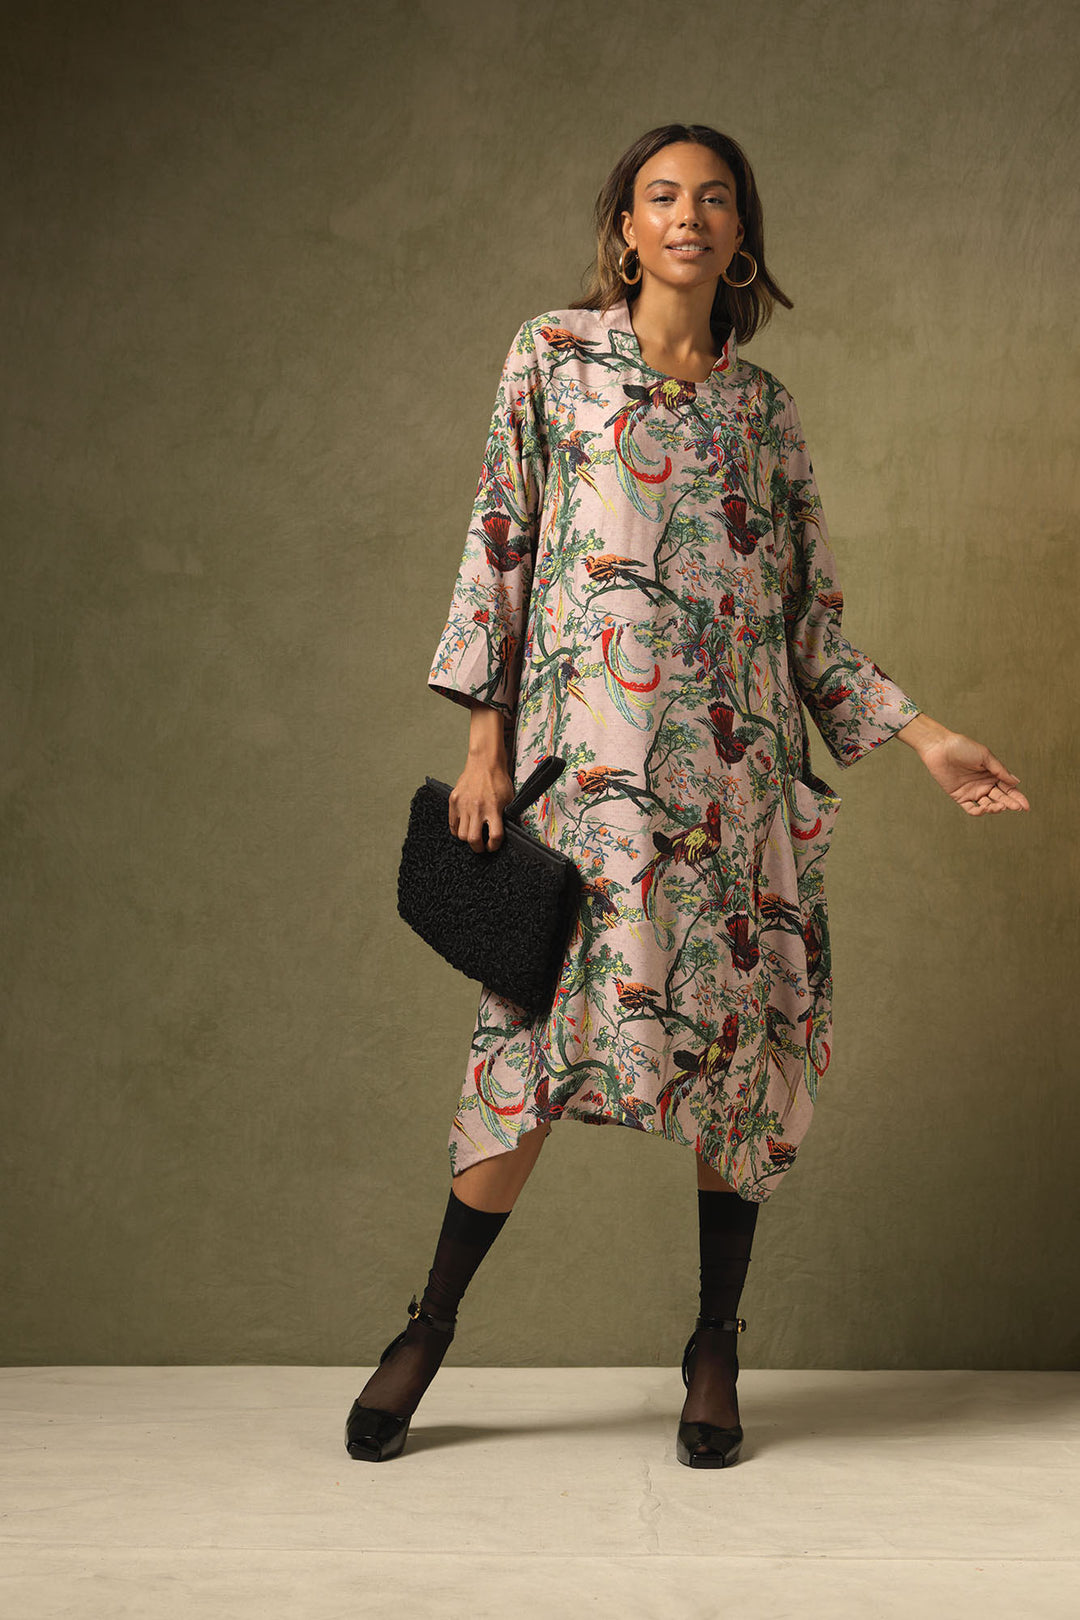 3/4 length sleeve asymmetric ladies dress with chinoiserie patterns on a dusky pink background by One Hundred Stars